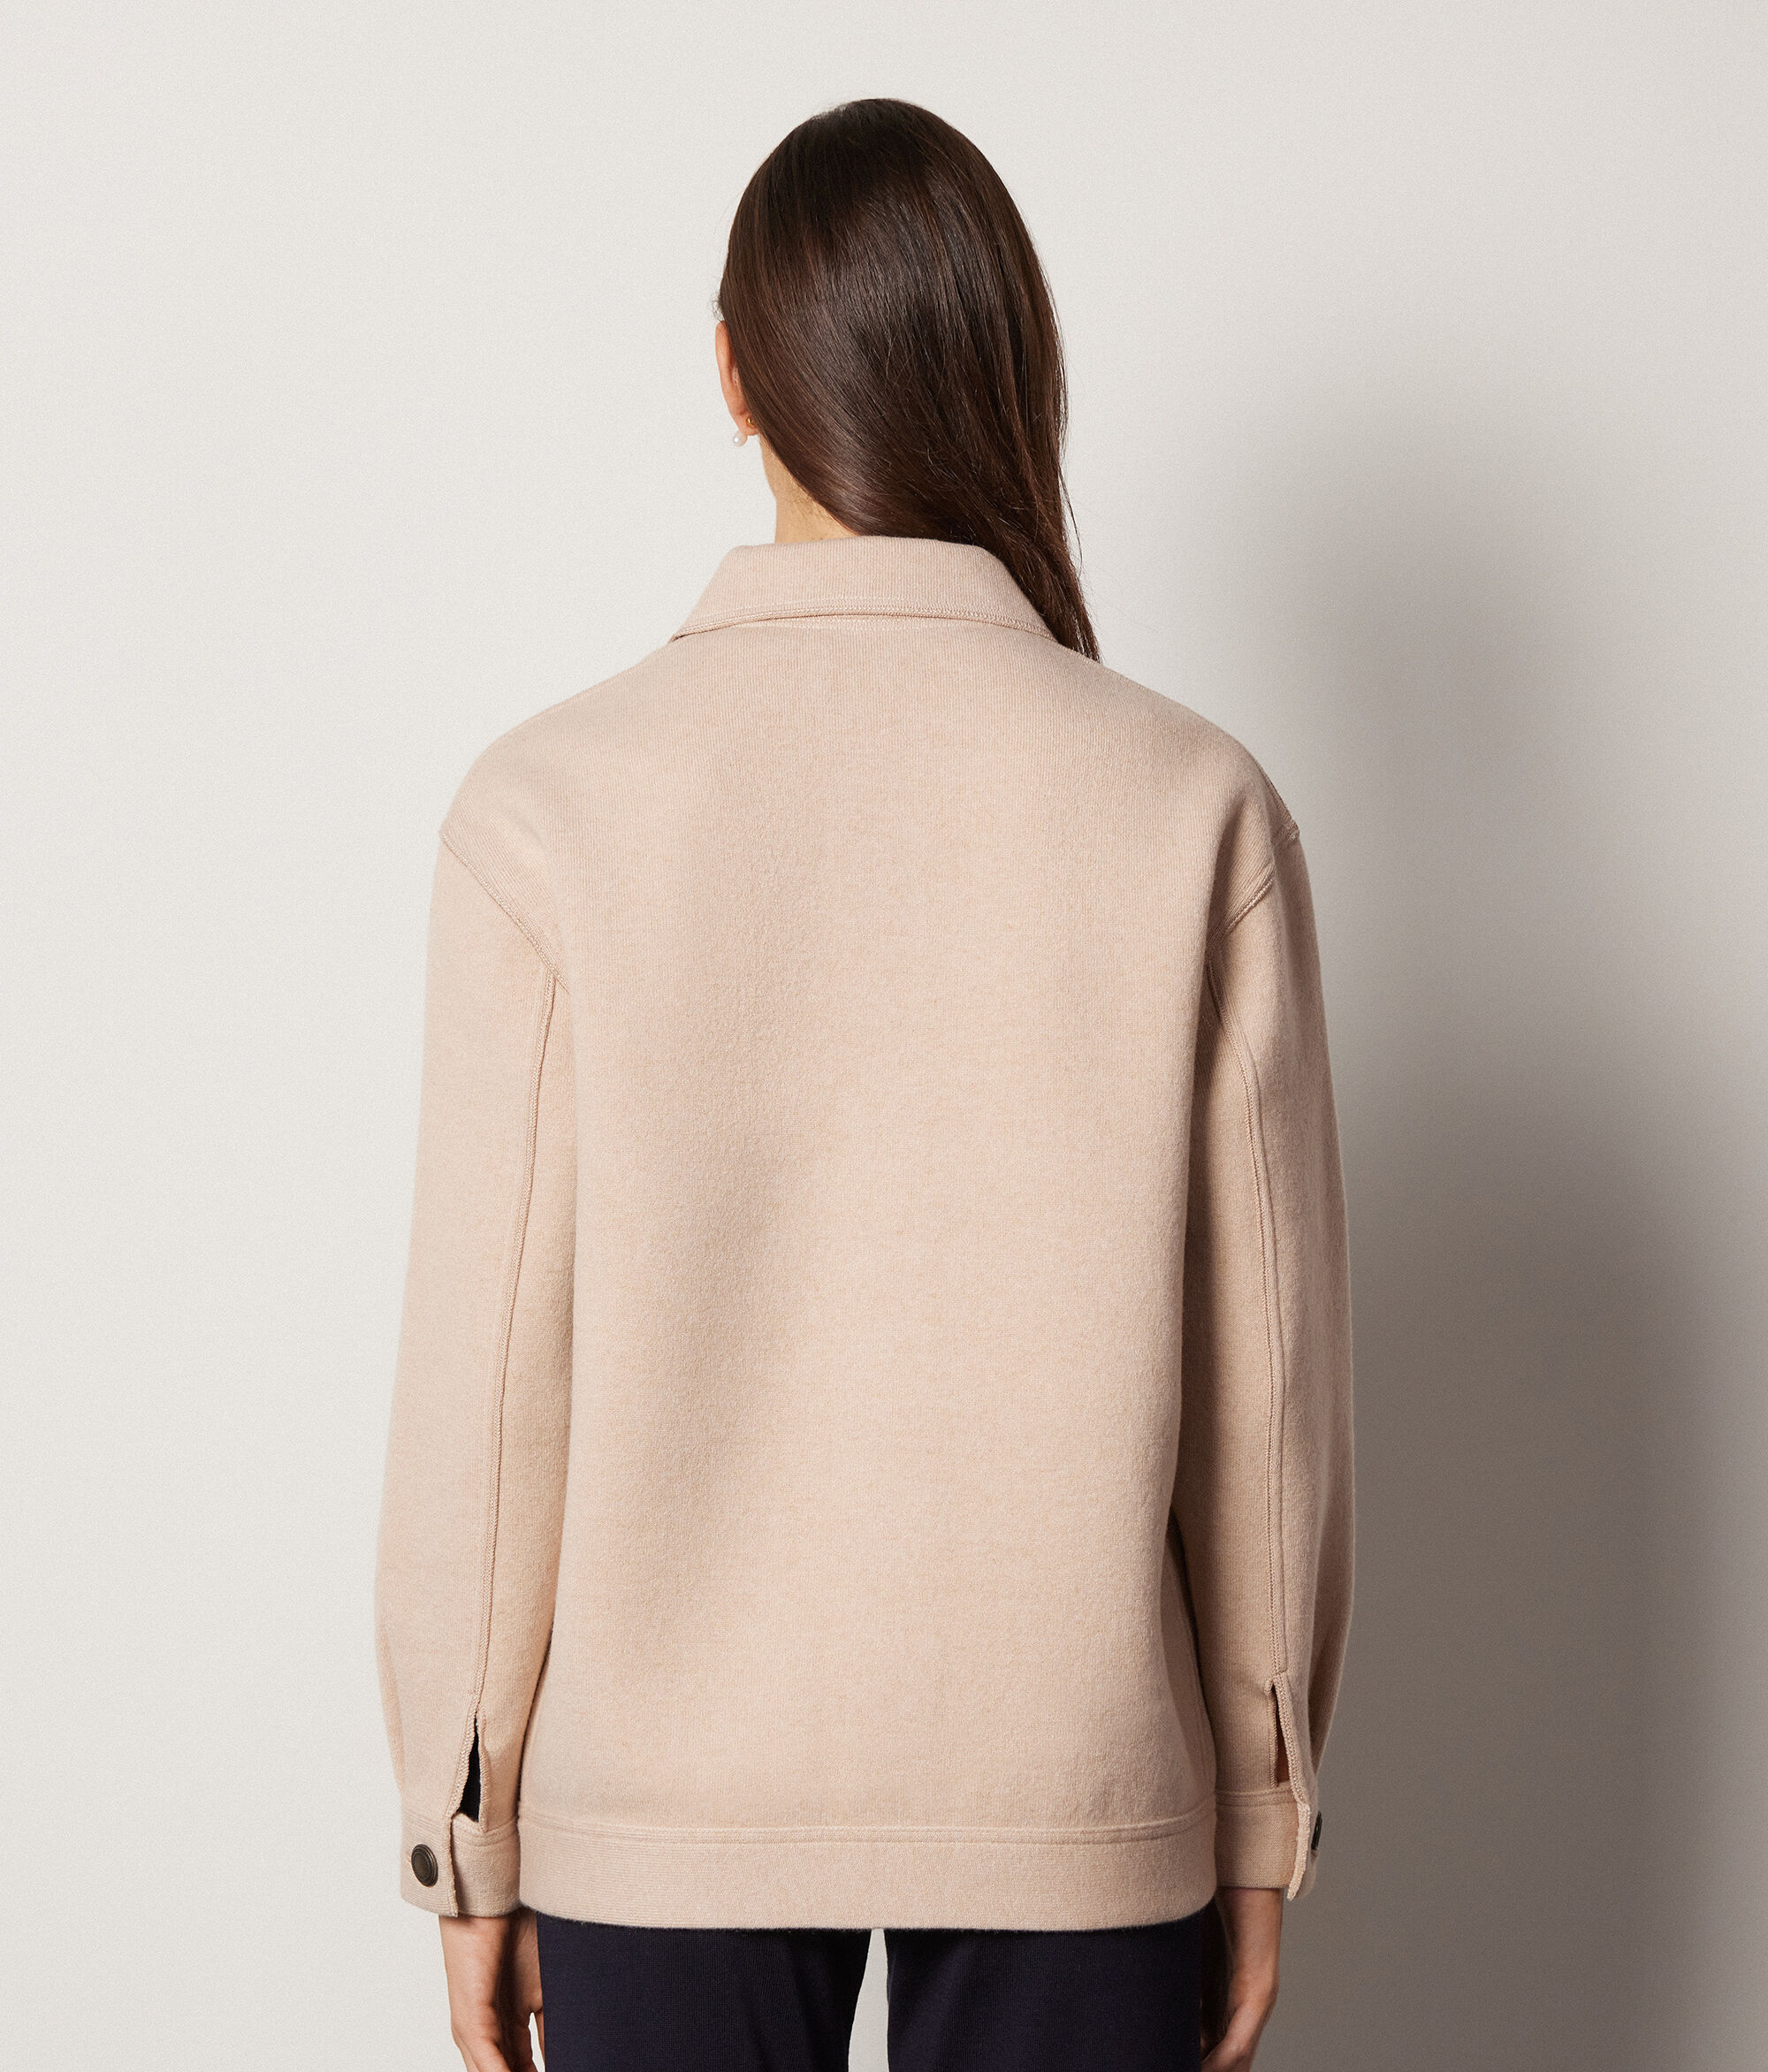 Cashmere Coat with Stitching